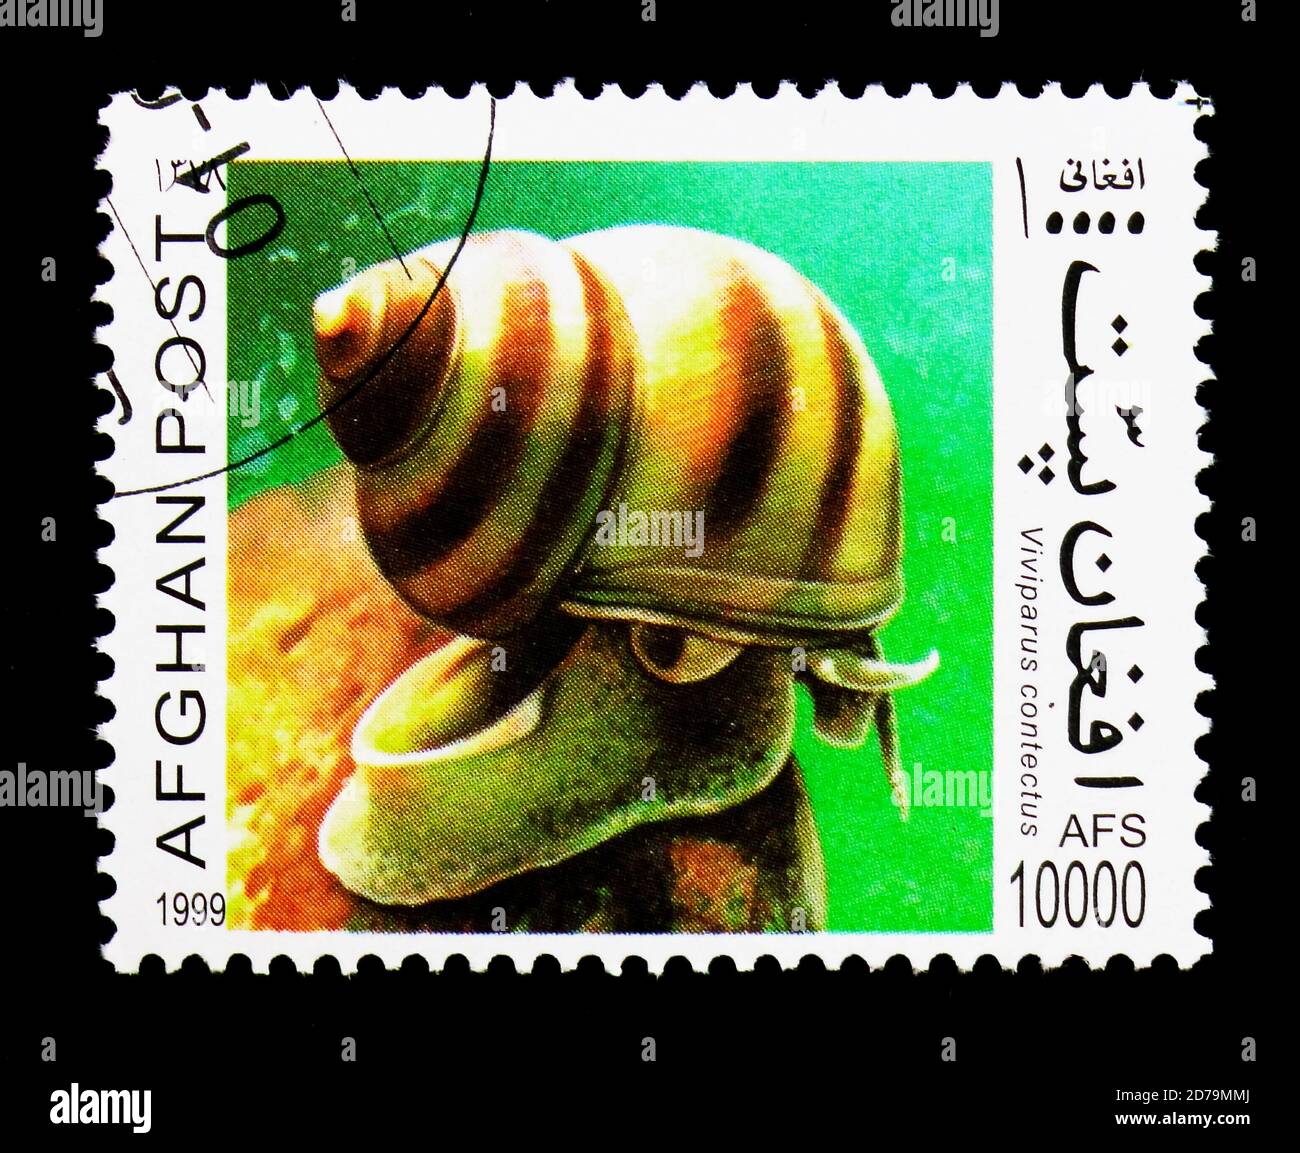 MOSCOW, RUSSIA - DECEMBER 21, 2017: A stamp printed in Afghanistan shows Lister's River Snail (Viviparus contectus), Snails serie, circa 1999 Stock Photo